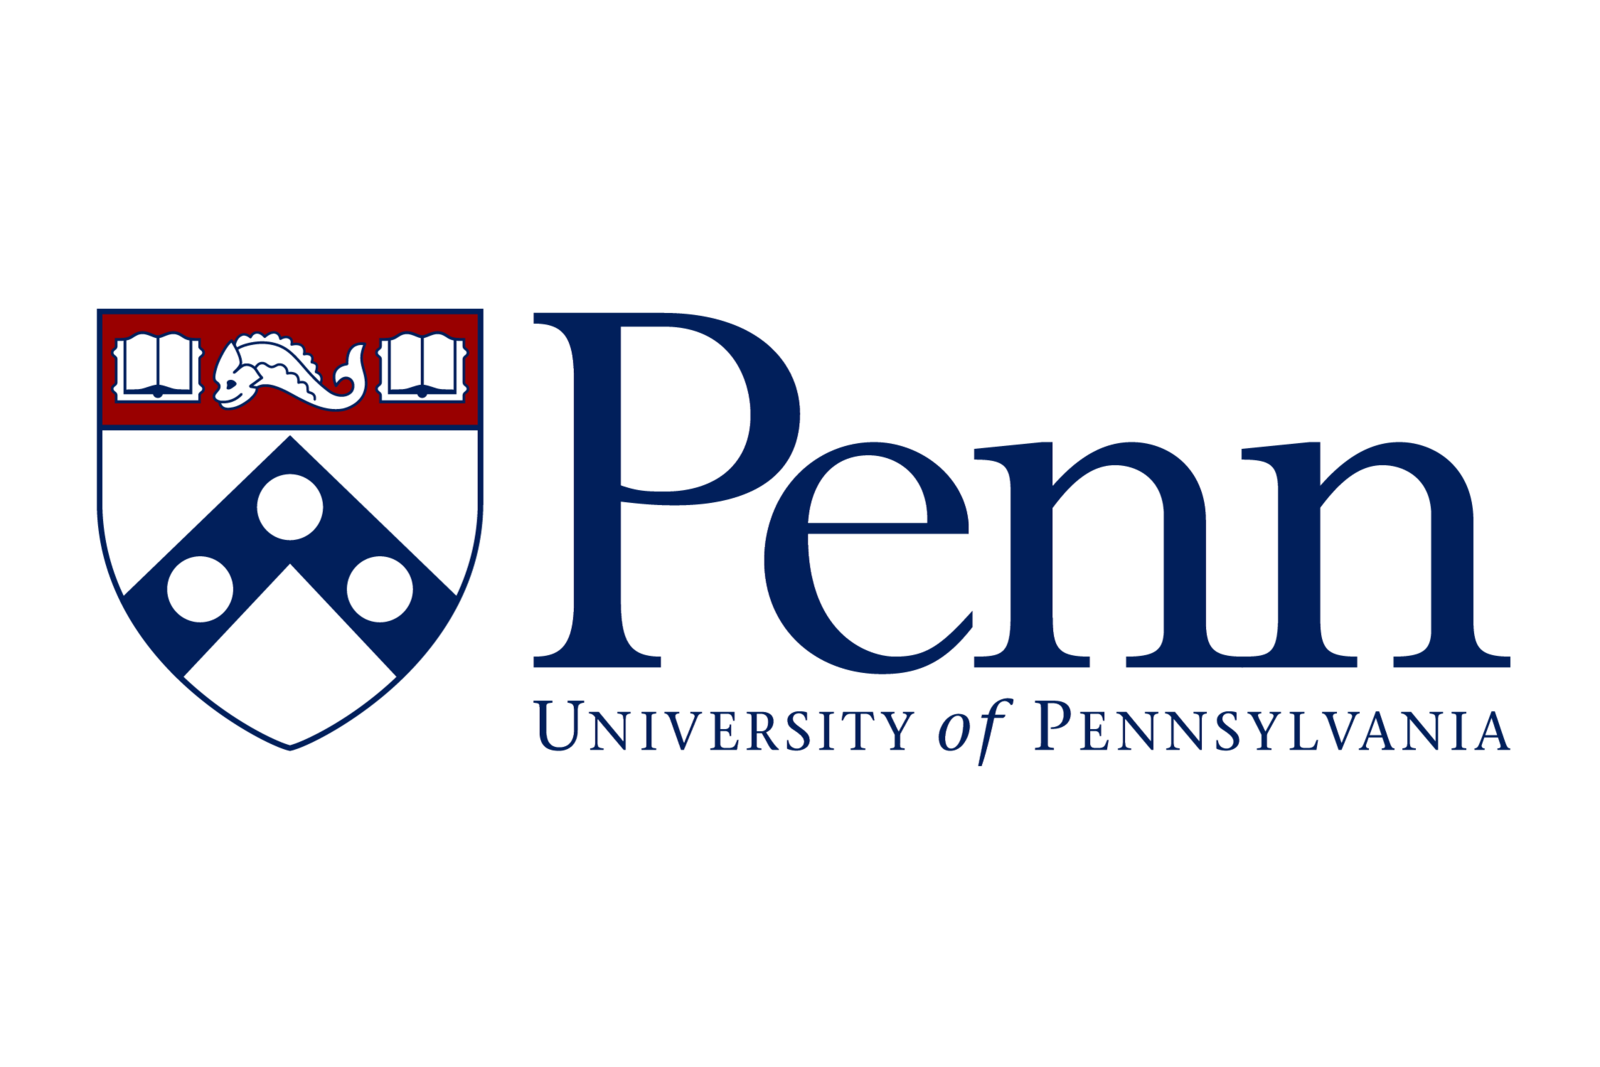 PENN HOUSING AND MEAL PLAN POLICIES ARE “BAD NEWS” TO ALL PENN STUDENTS